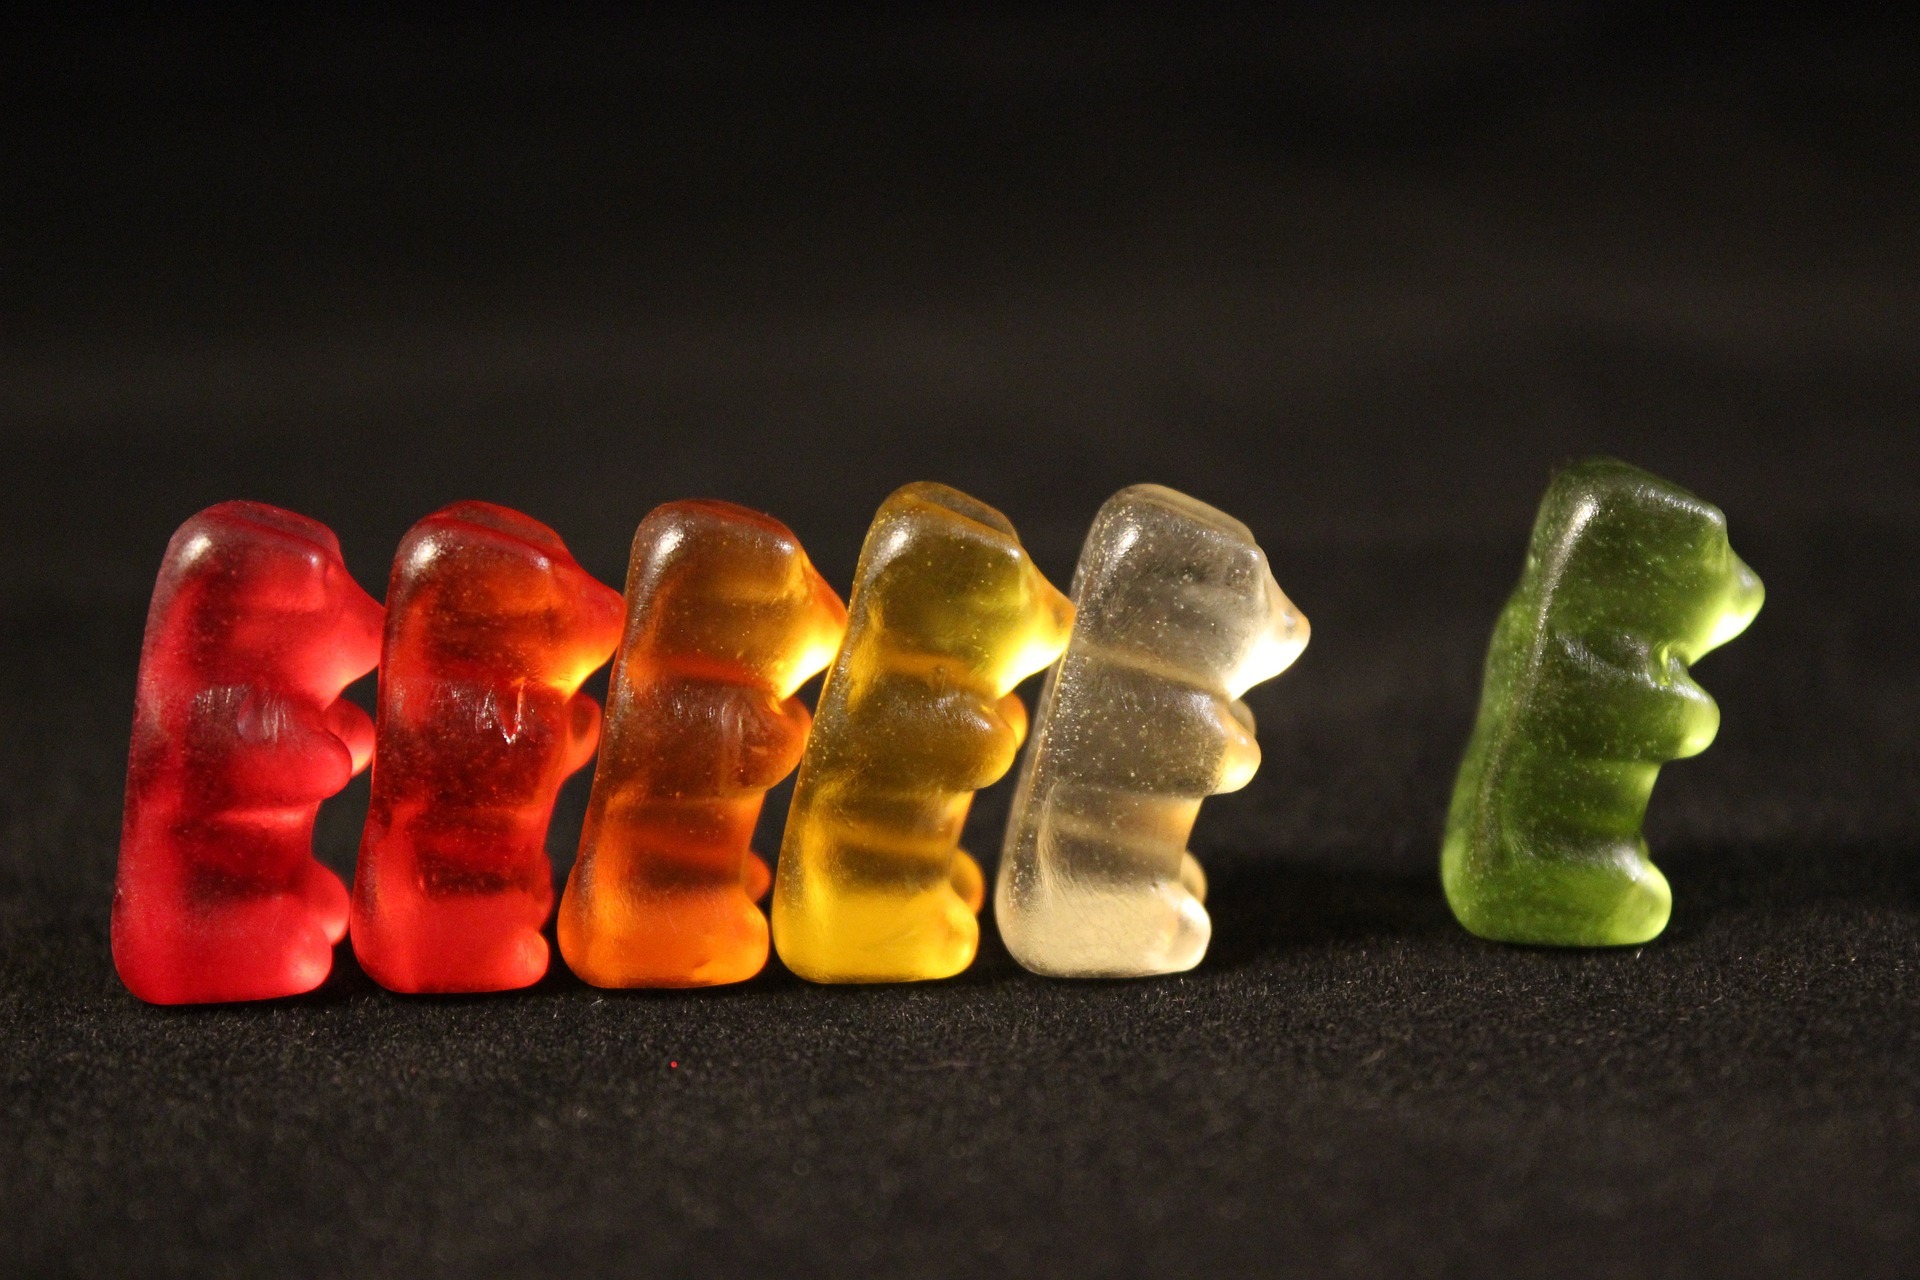 How to Make Healthy Gummy Bears at Home